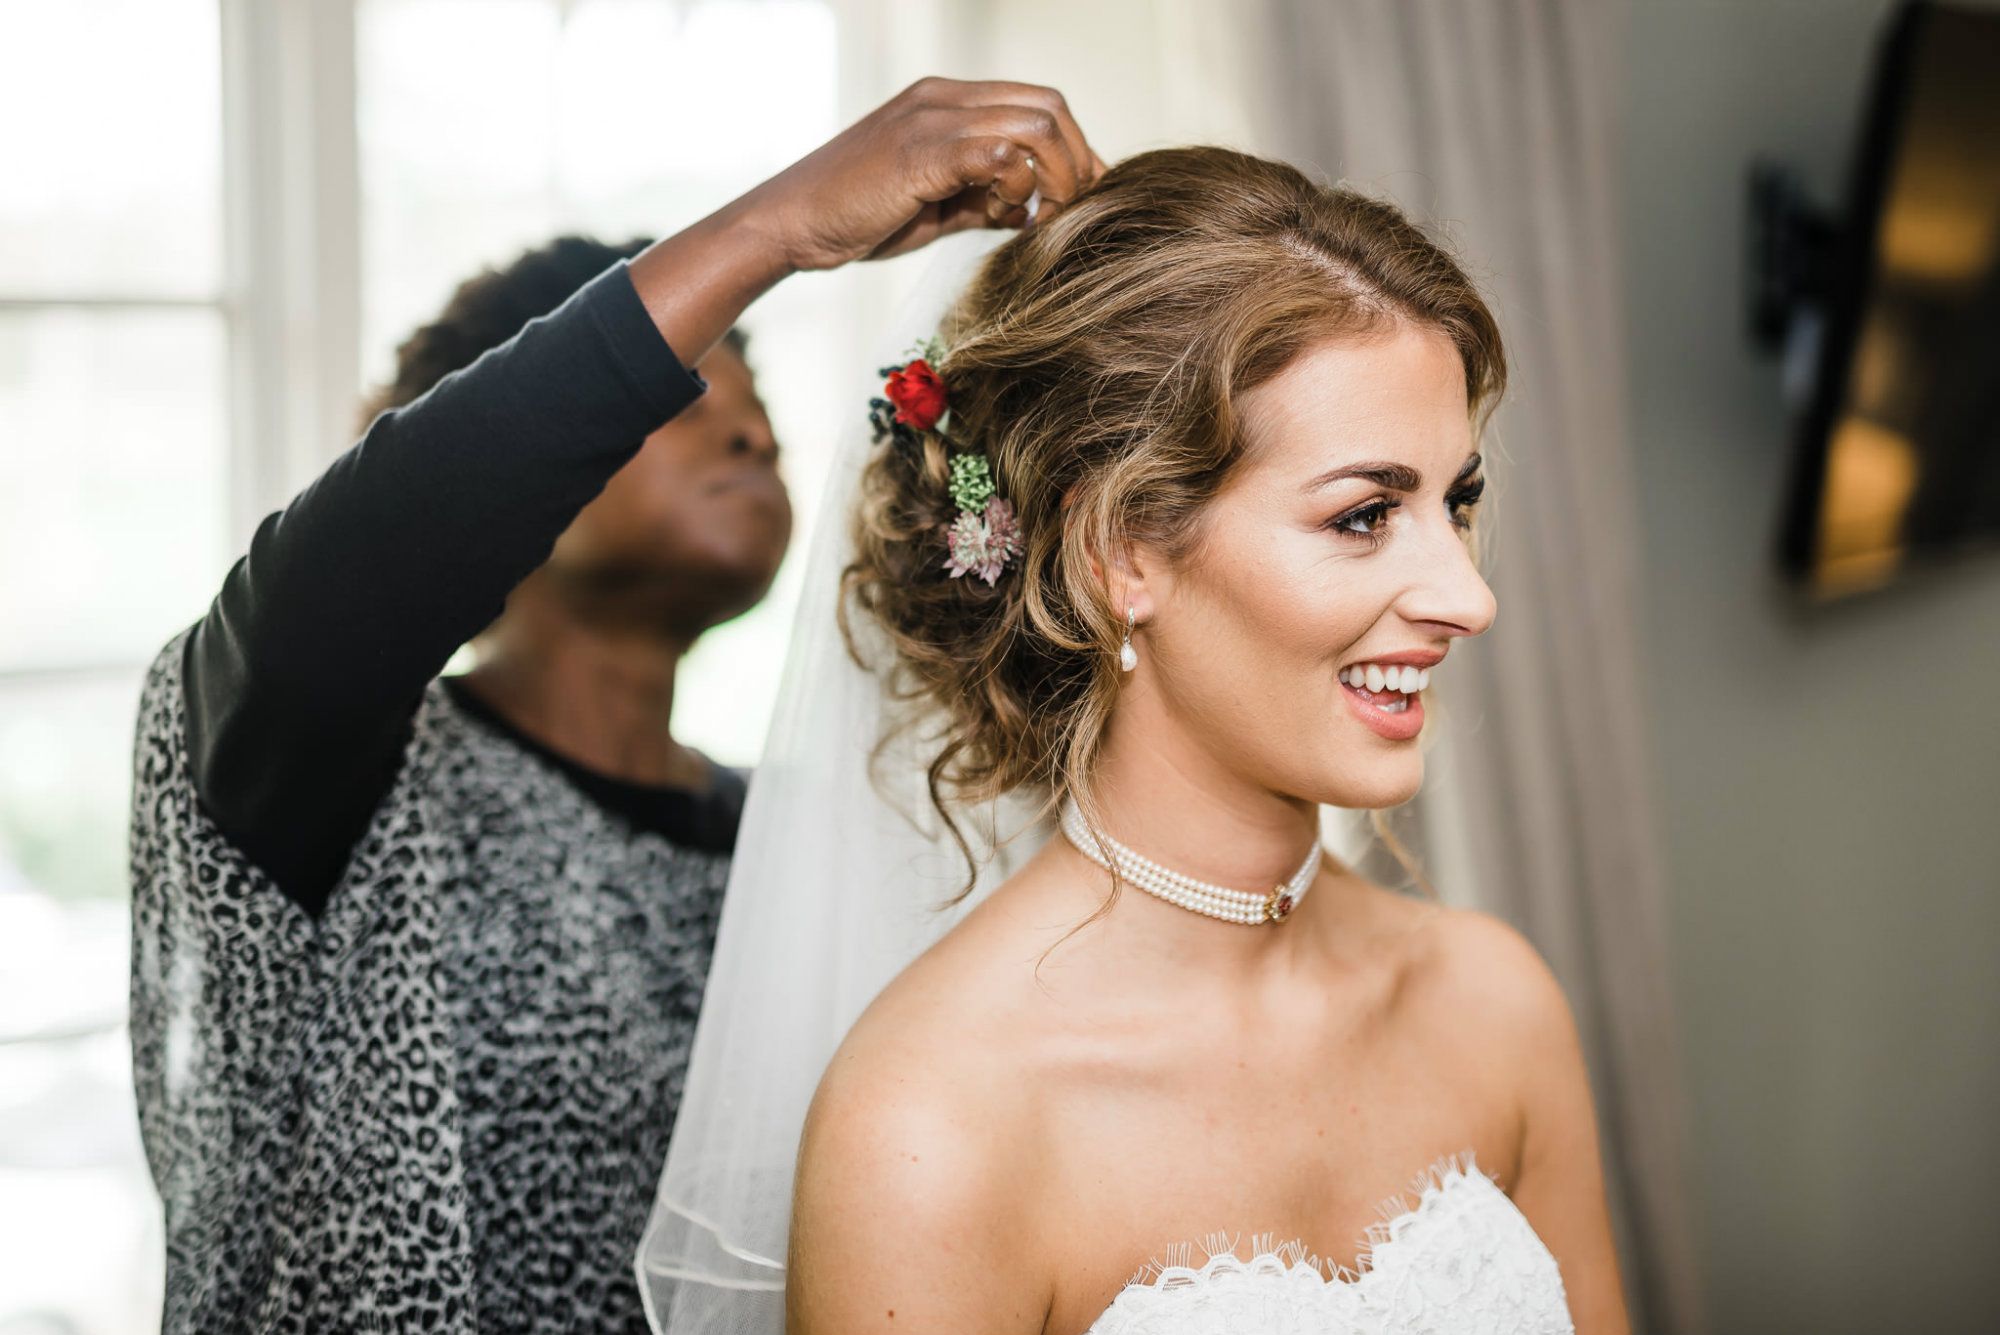 Choose The Best Wedding Hairstylist With These Easy Steps